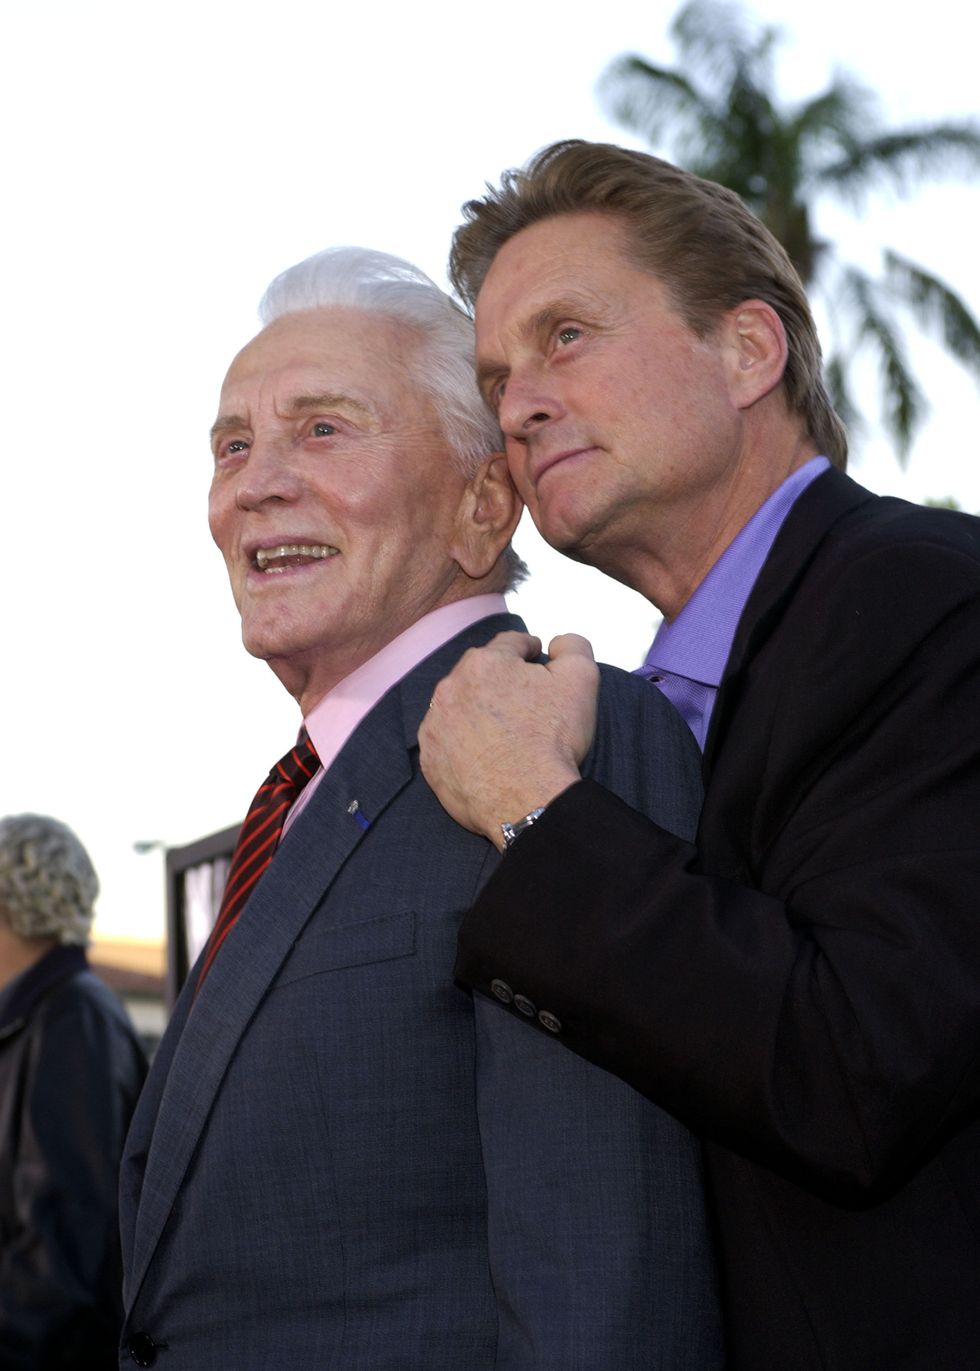 Kirk Douglas: Douglas and his younger 'twin,' Michael, have a father-son moment during the It Runs in the Family premiere in Westwood, California, in 2003. (Photo: WireImage)